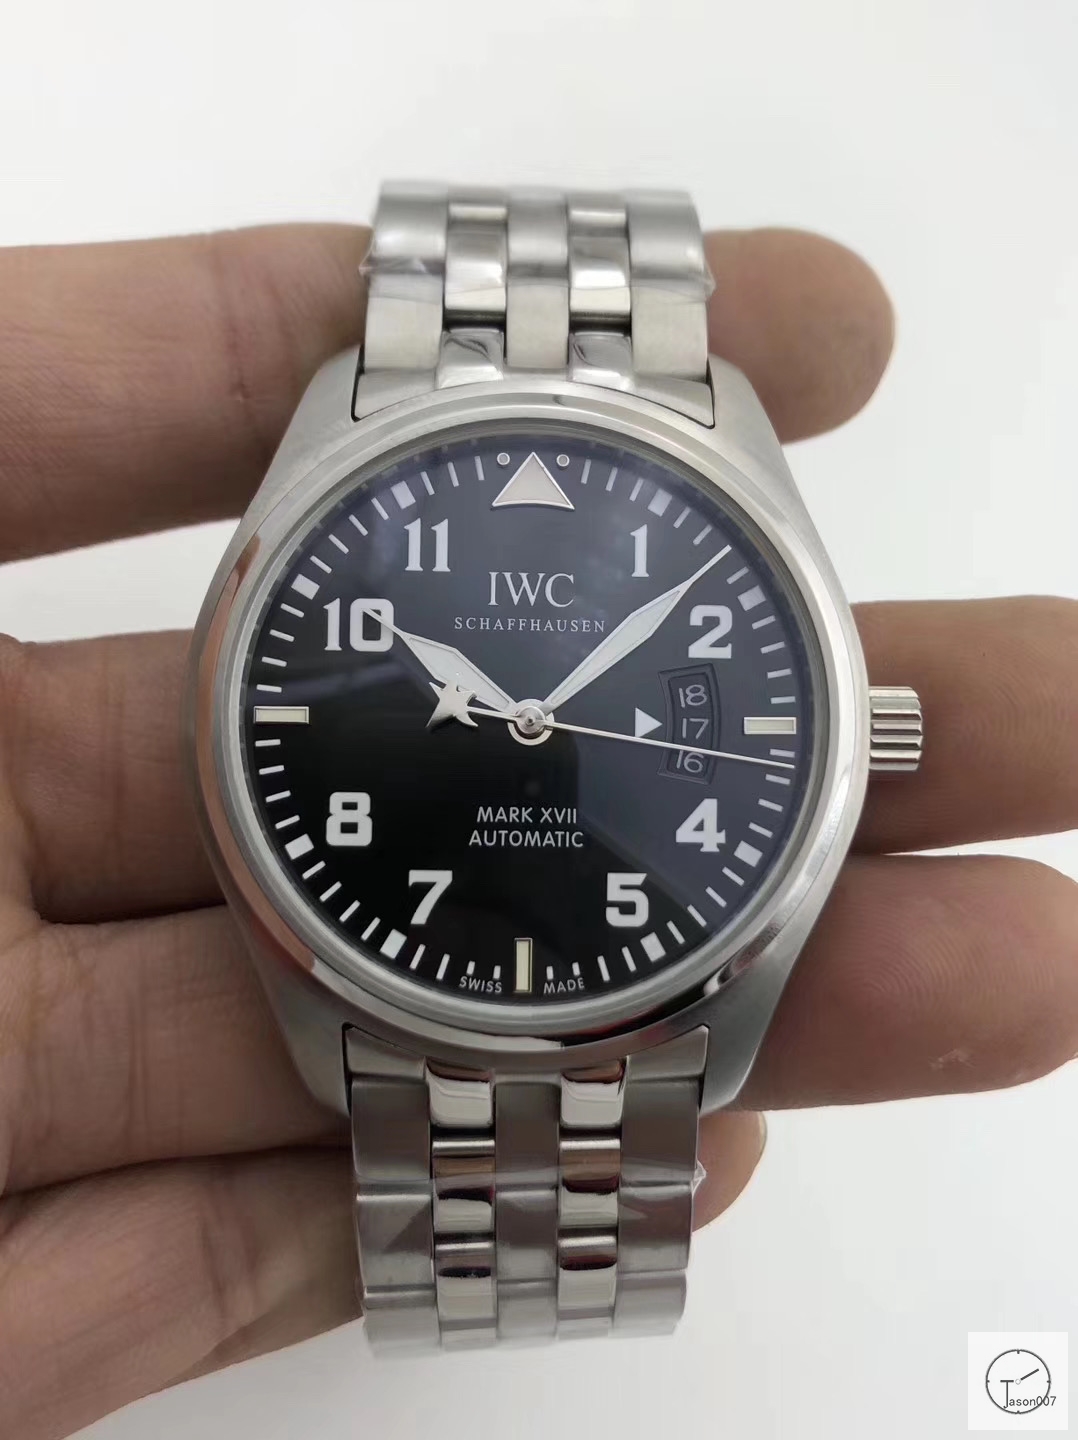 IWC PILOT'S SCHAFFHAUSEN Mark XV2 WATCH AUTOMATIC SPITFIRE AUTOMATIC Mechical IW326803 42MM BLACK DIAL Everose Gold Case Stainless Steel Case Rubber Strap Mens Wristwatches ICW22150560